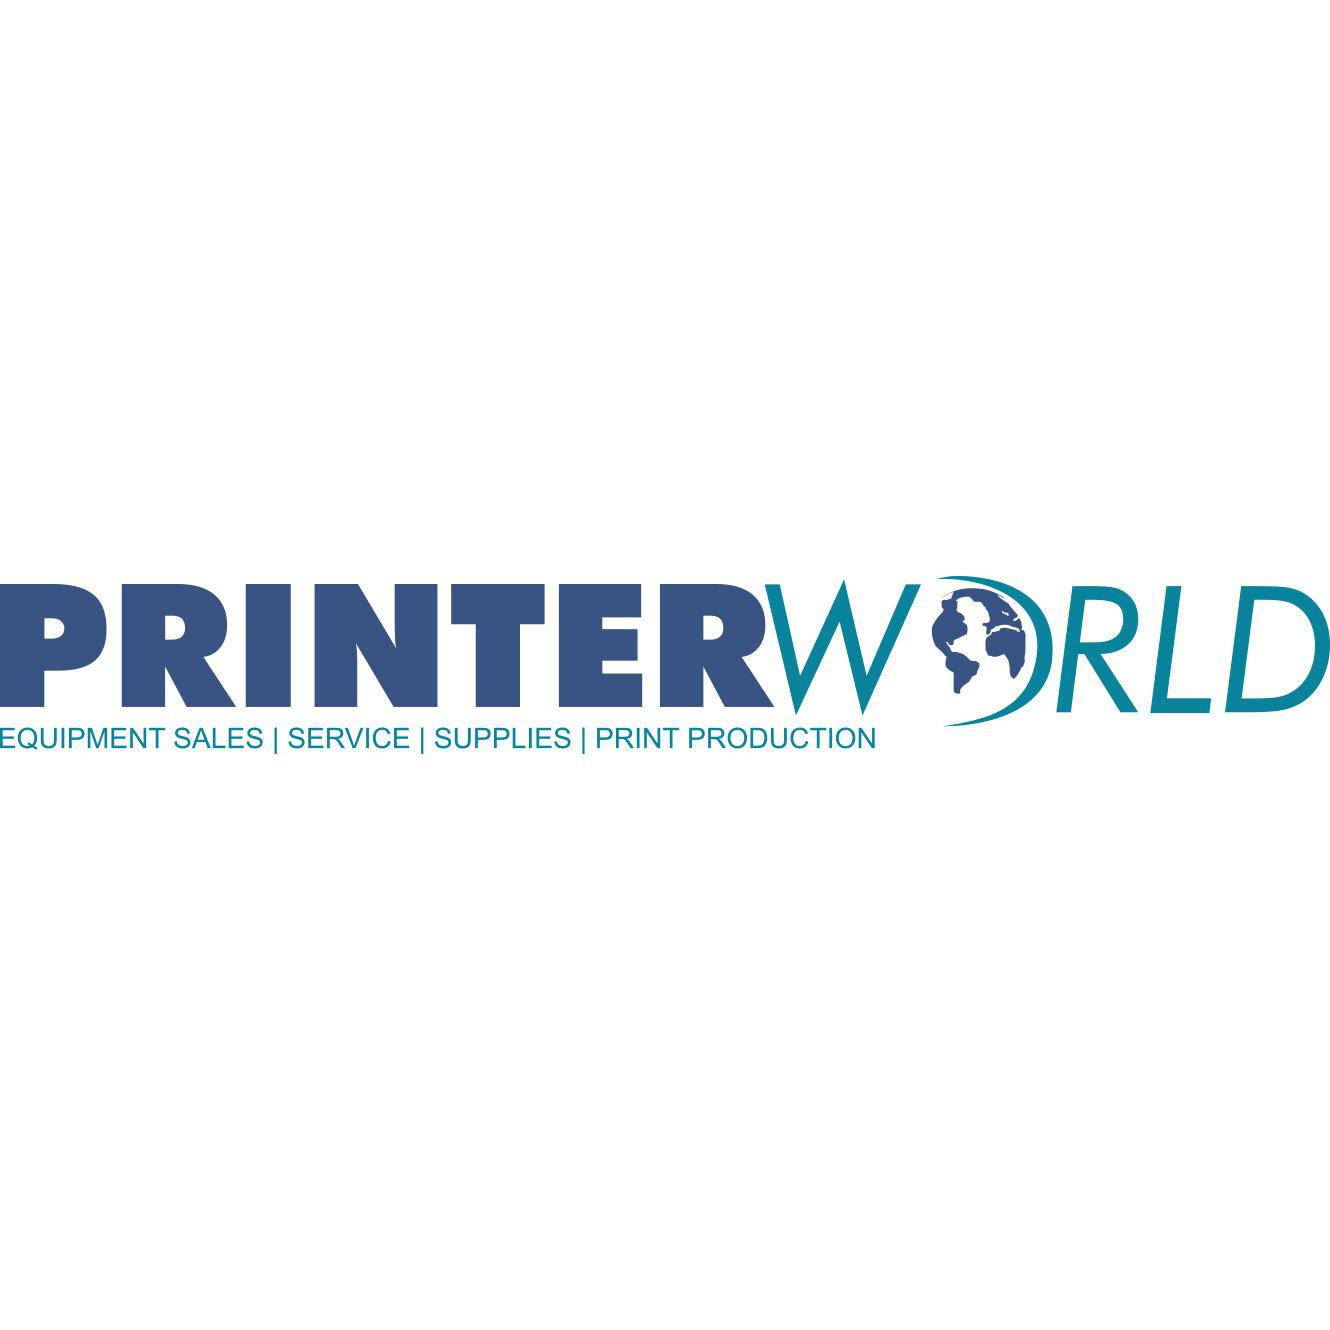 Printer World® - Local Print Shop, Online Printing Services | Edmonton à Edmonton: Printer World Print Shop in Edmonton is your go-to destination for all your printing needs.